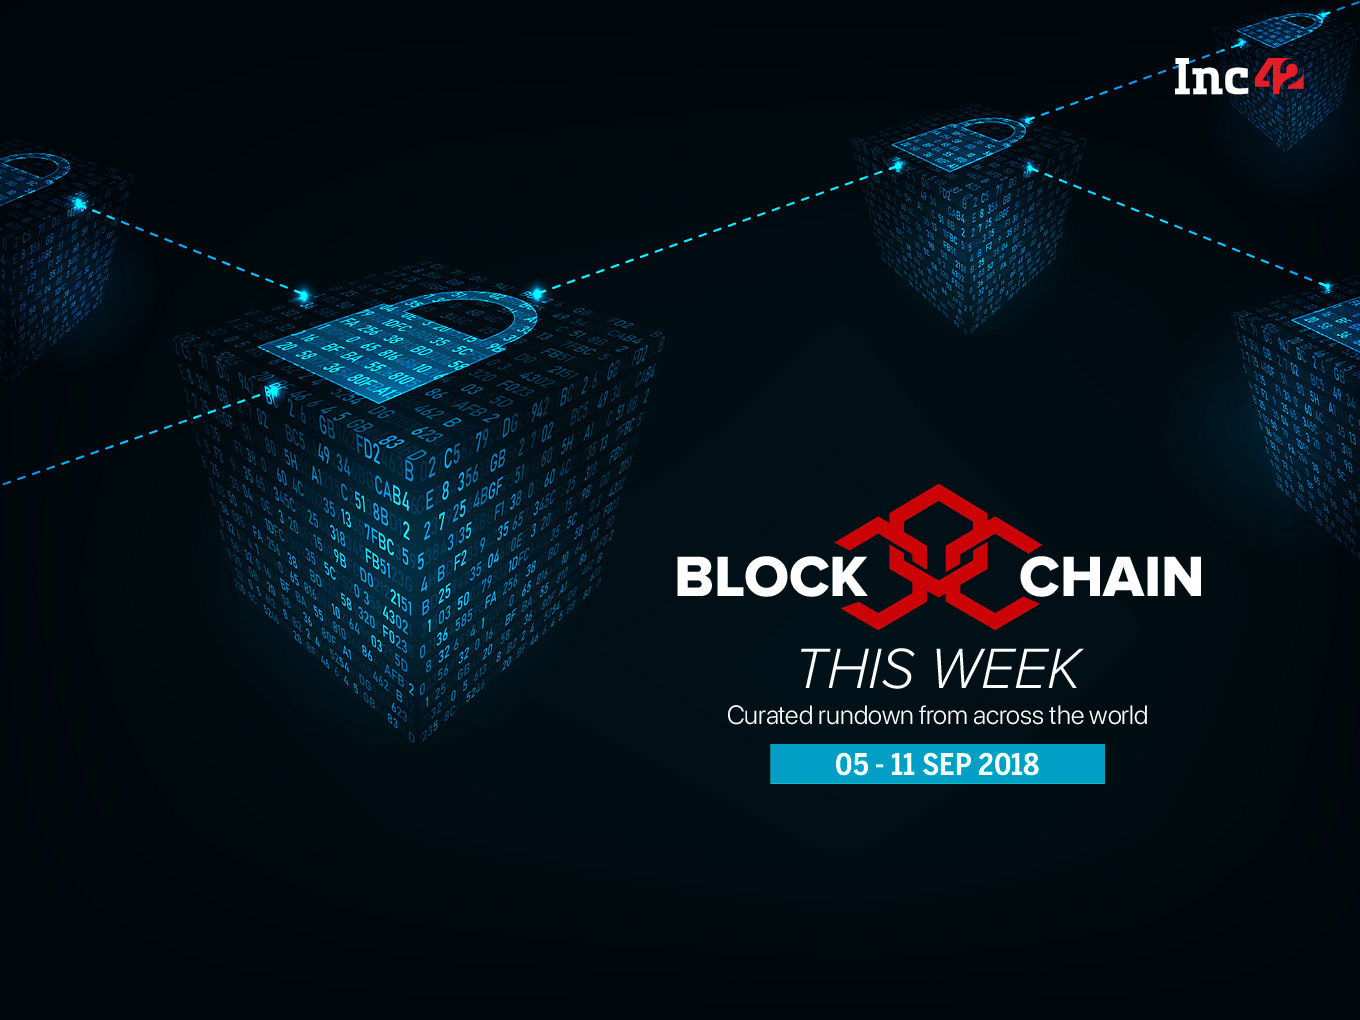 Blockchain This Week: West Bengal To Use Blockchain For Issuing Birth Certificates, Chinese City Is Using Blockchain To Track Convicts On Parole, And More